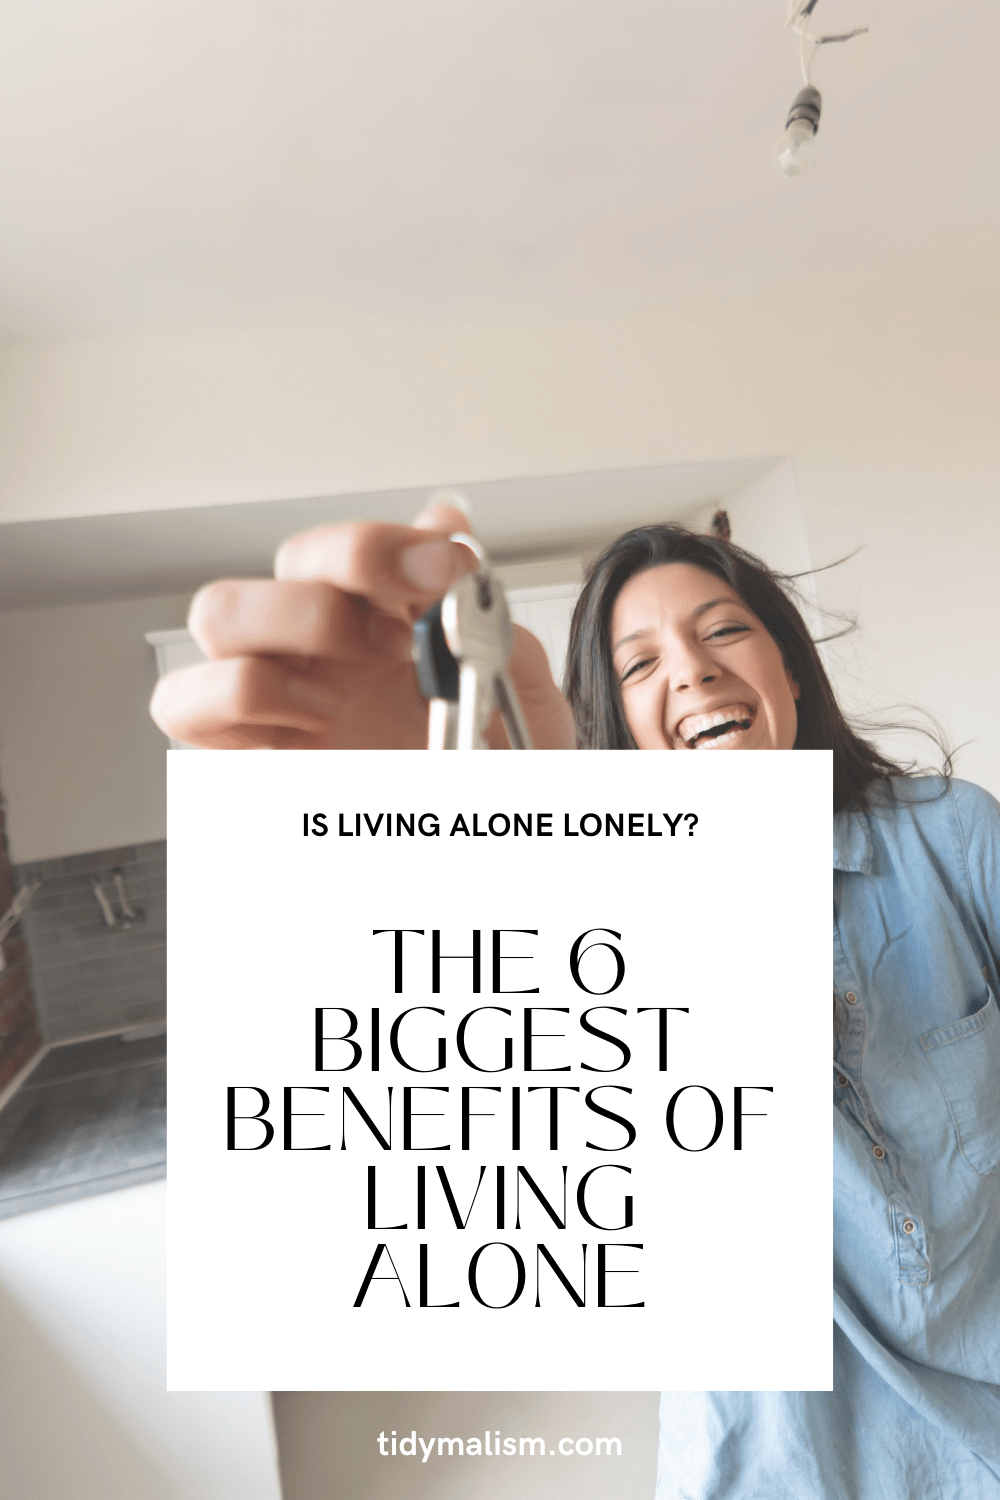 Six Biggest Advantages And Benefits Of Living Alone